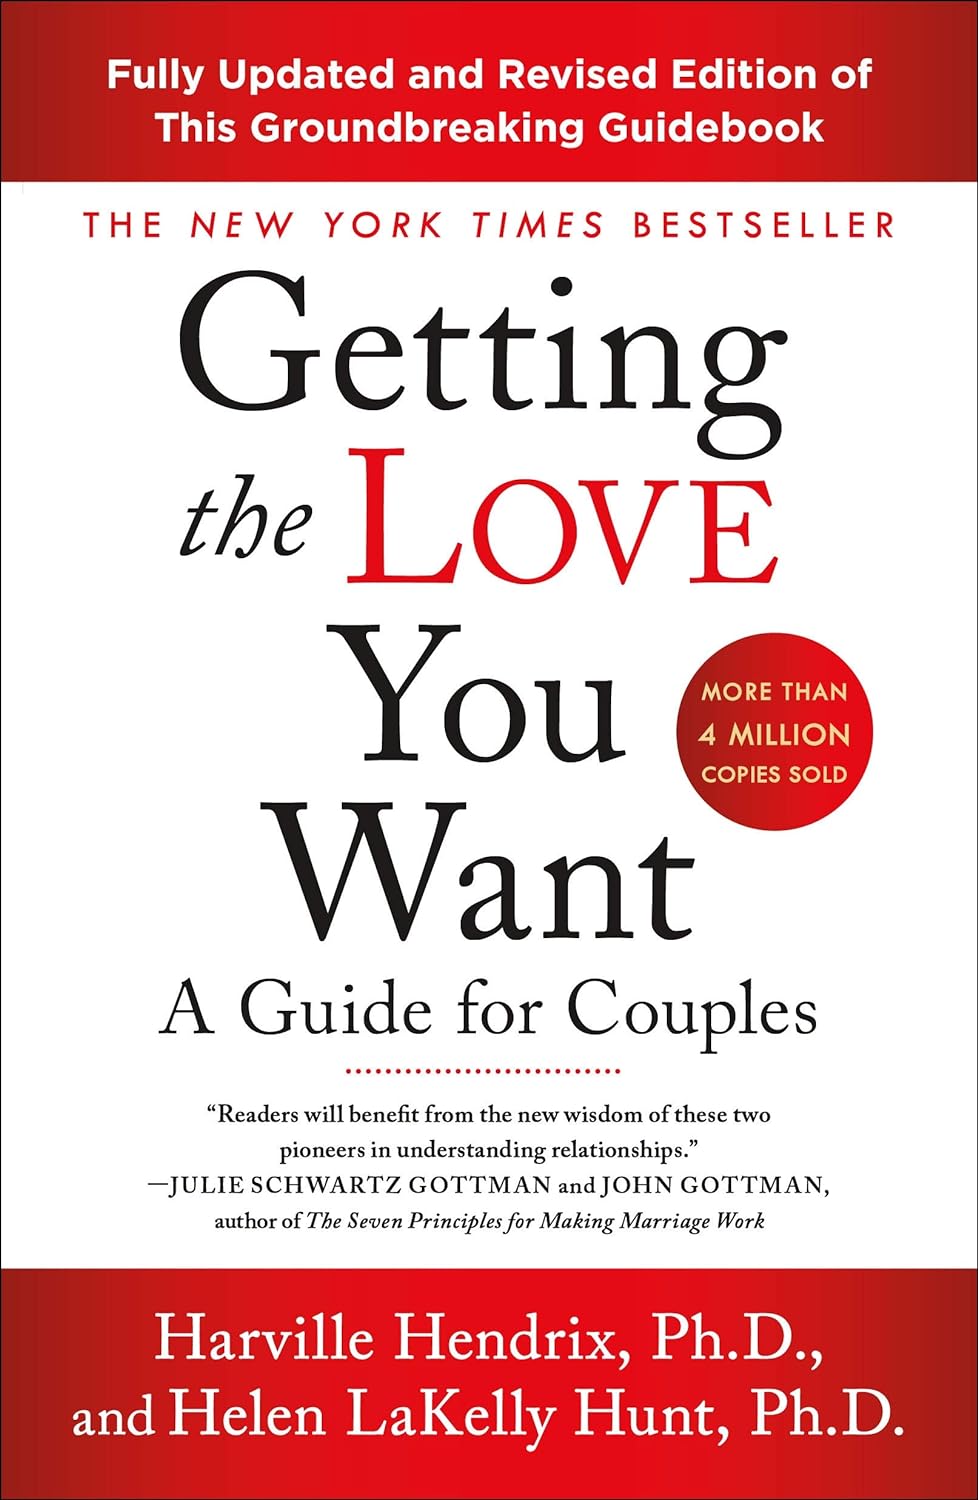 Getting the Love You Want By Harville Hendrix